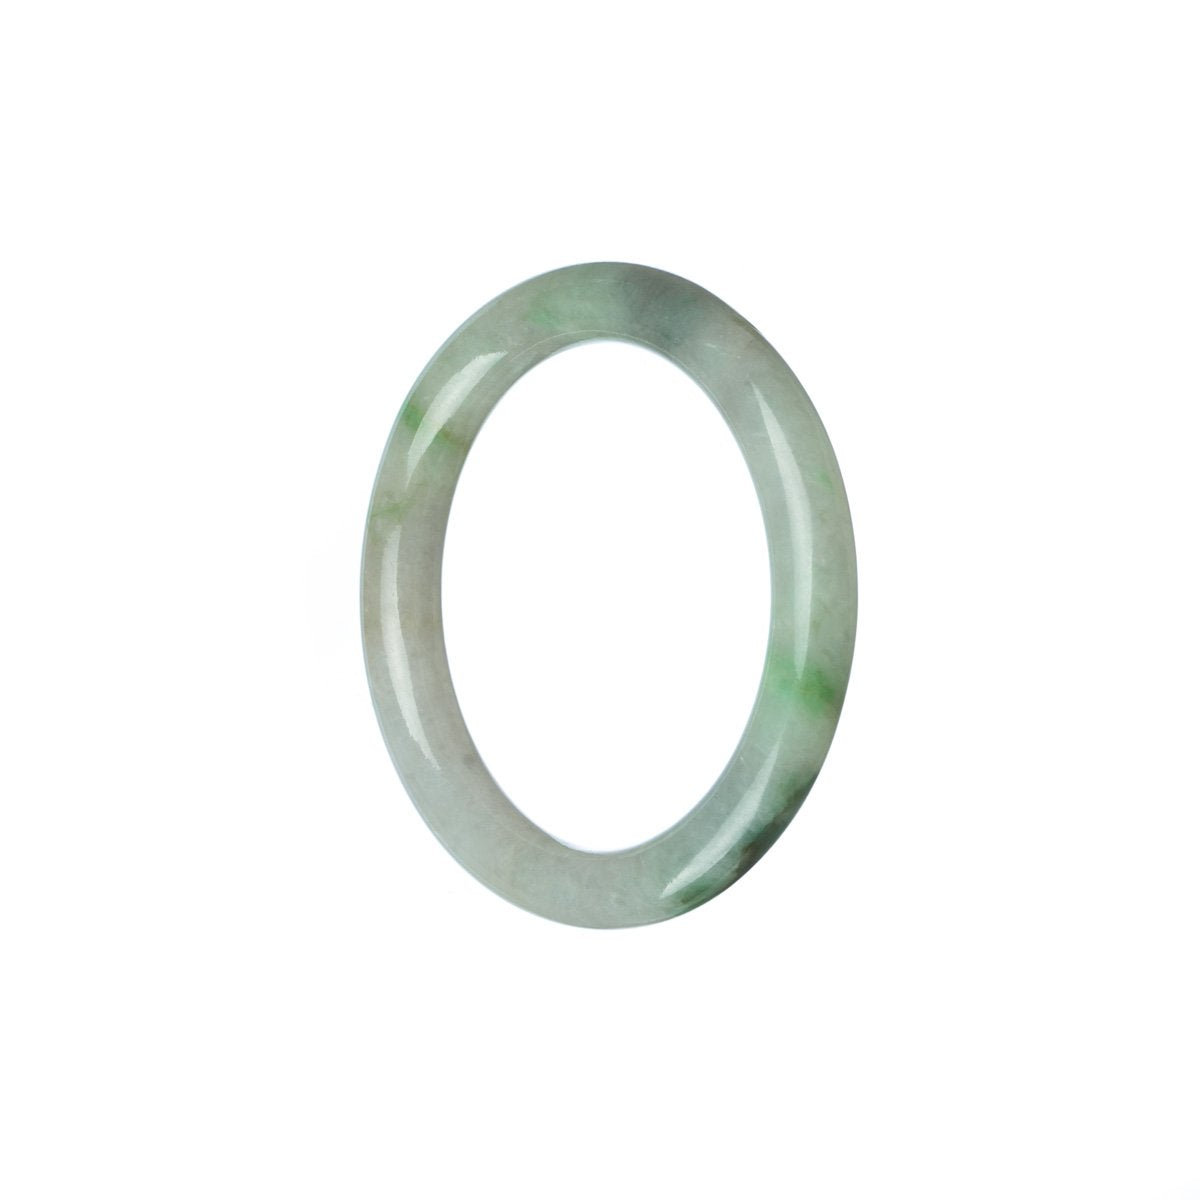 A close-up image of a round, child-sized green and white jadeite bangle bracelet. The bracelet is made of high-quality, genuine Grade A jadeite.